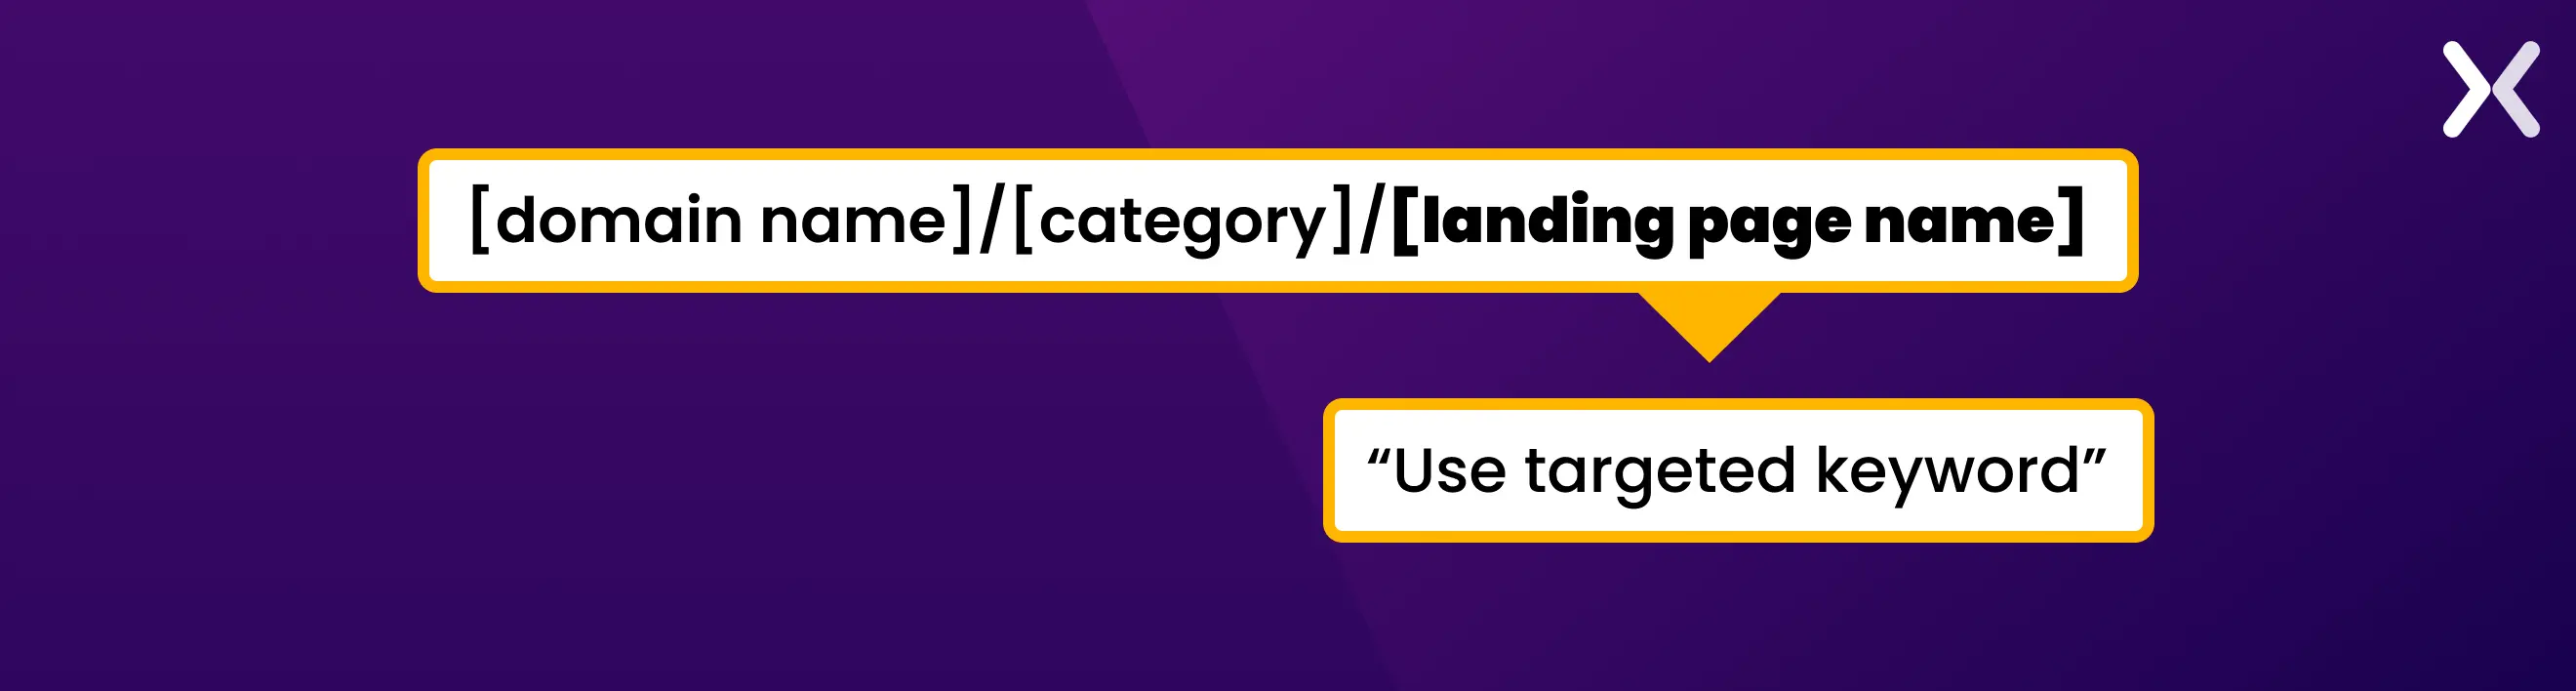 setting-up-the-right-URL-of-a-landing-page.webp